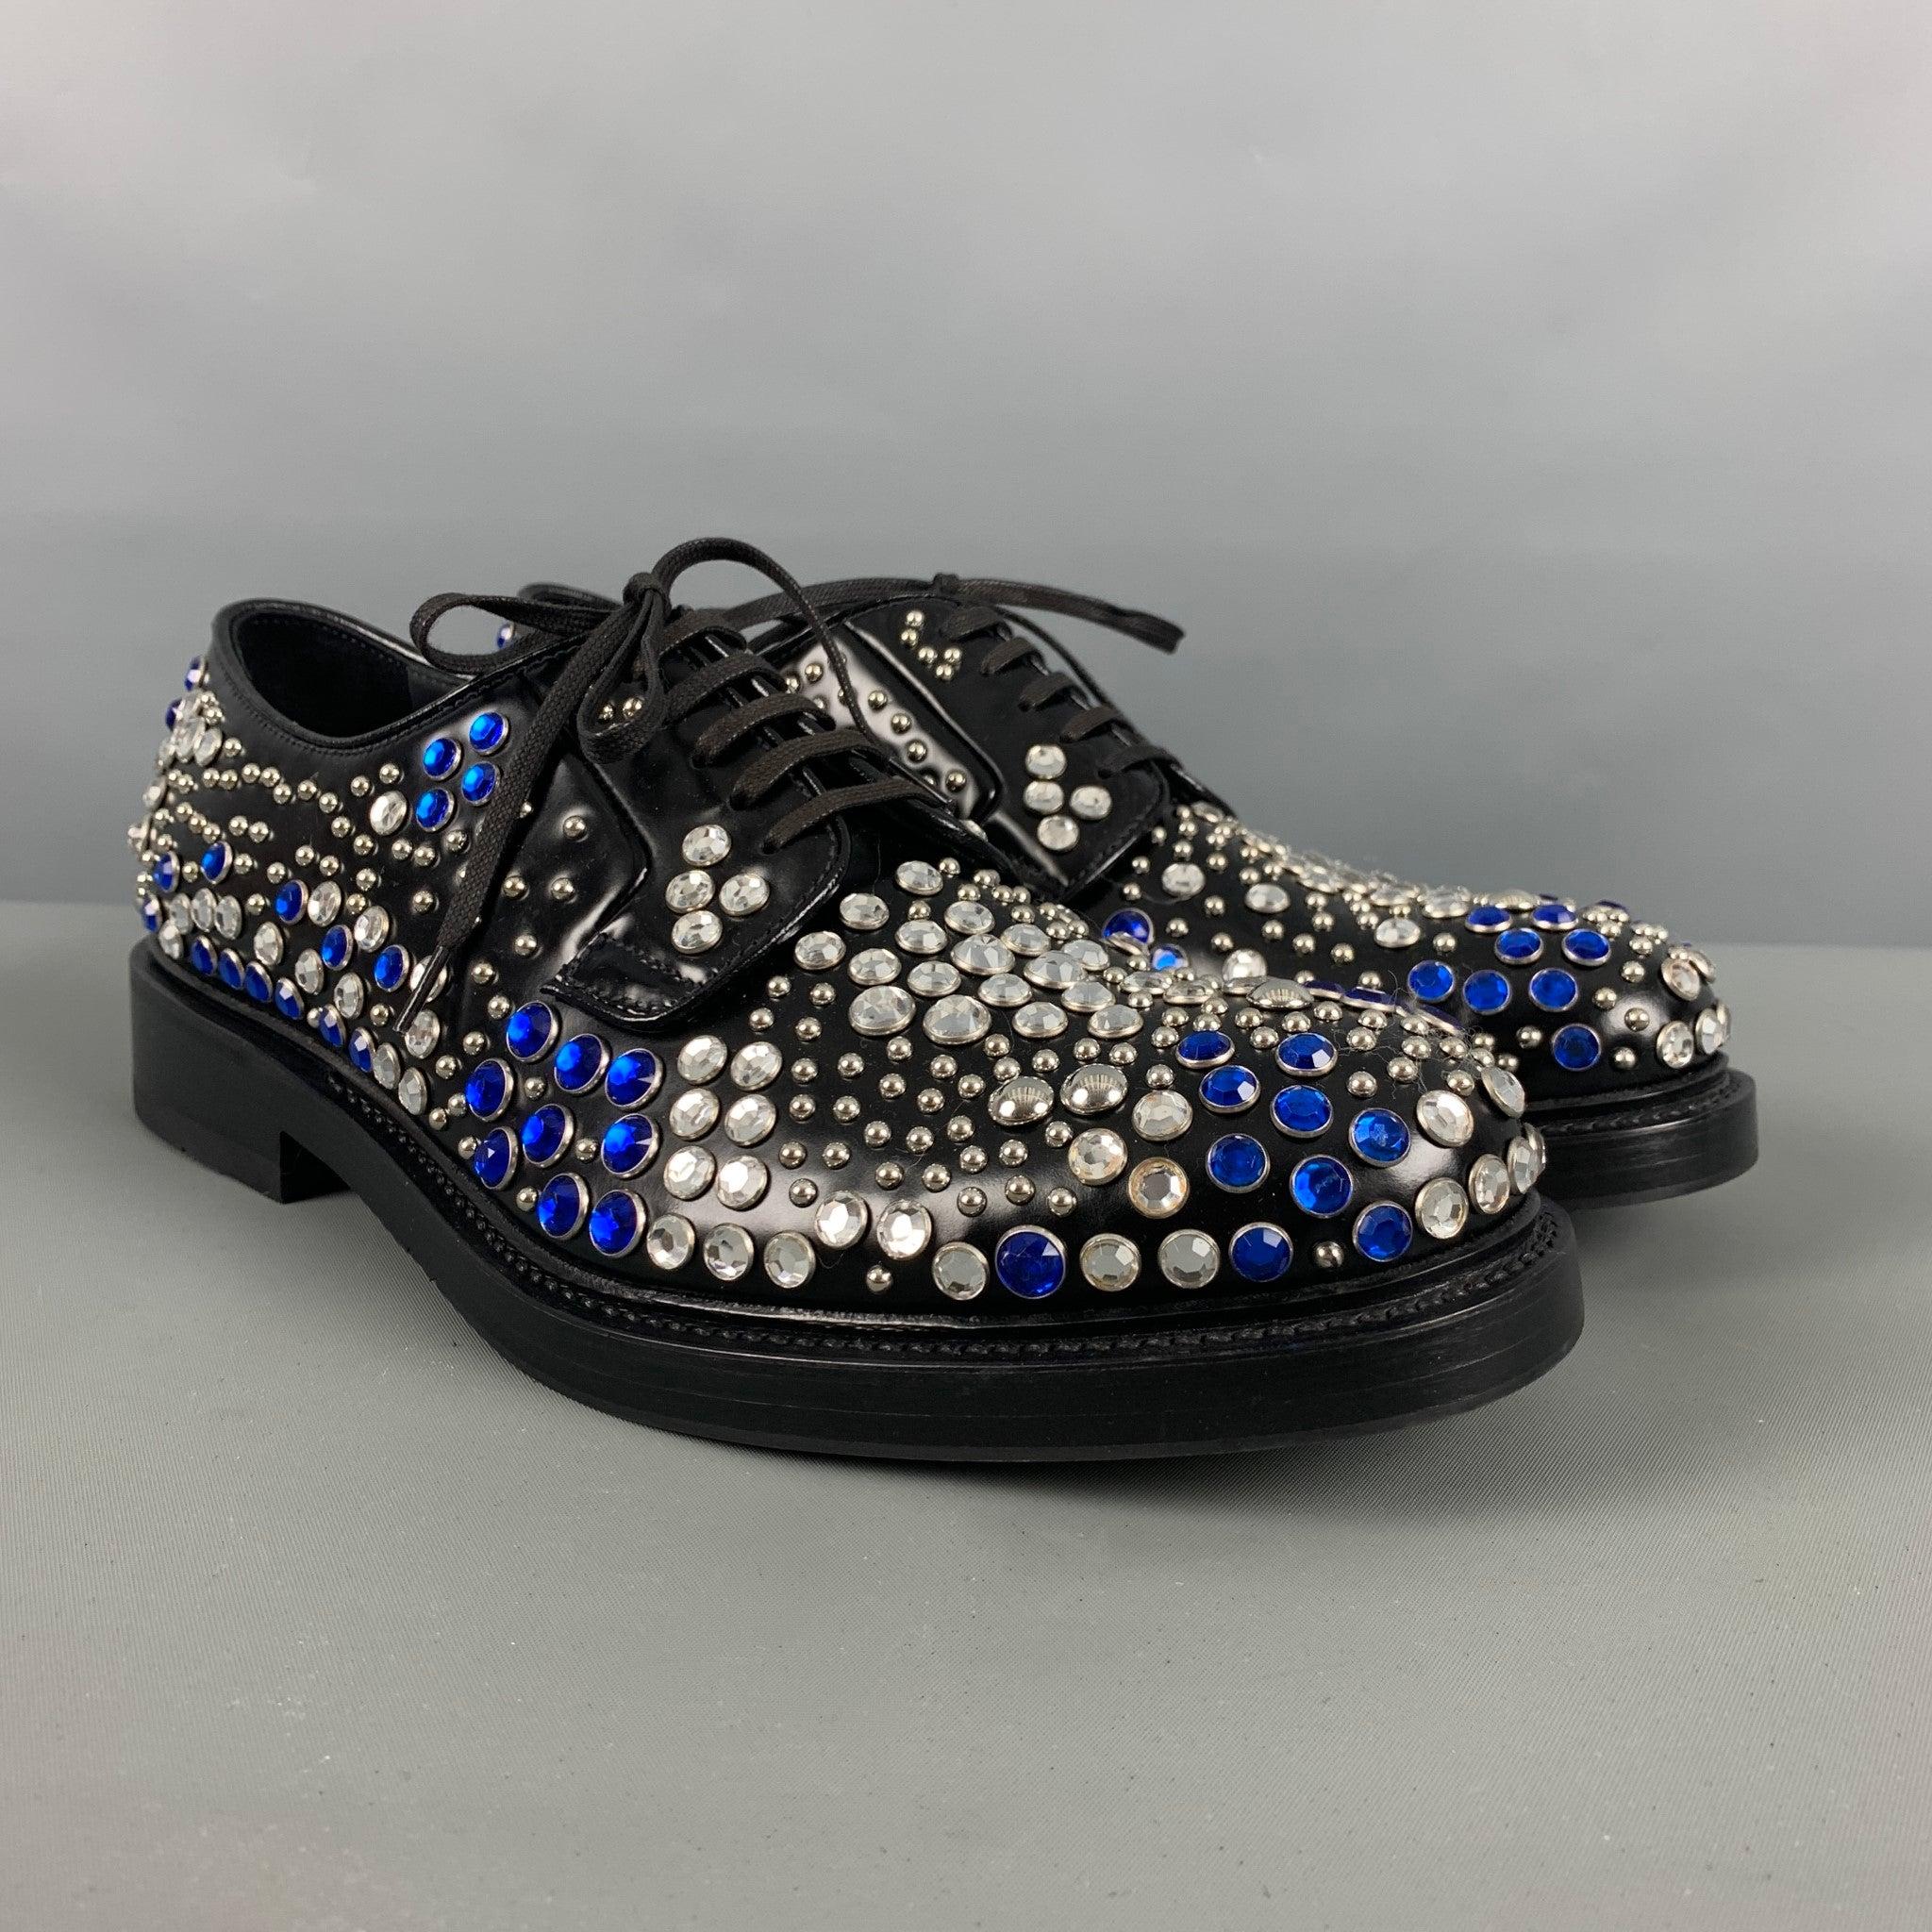 PRADA shoes comes in a black leather featuring a blue and silver tone studded design throughout, round
 toe, wooden sole, and a lace up closure. Comes with Box and Dusty Bag. Made in Italy.Excellent Pre-Owned Condition. 

Marked:   2EA151 8Outsole: